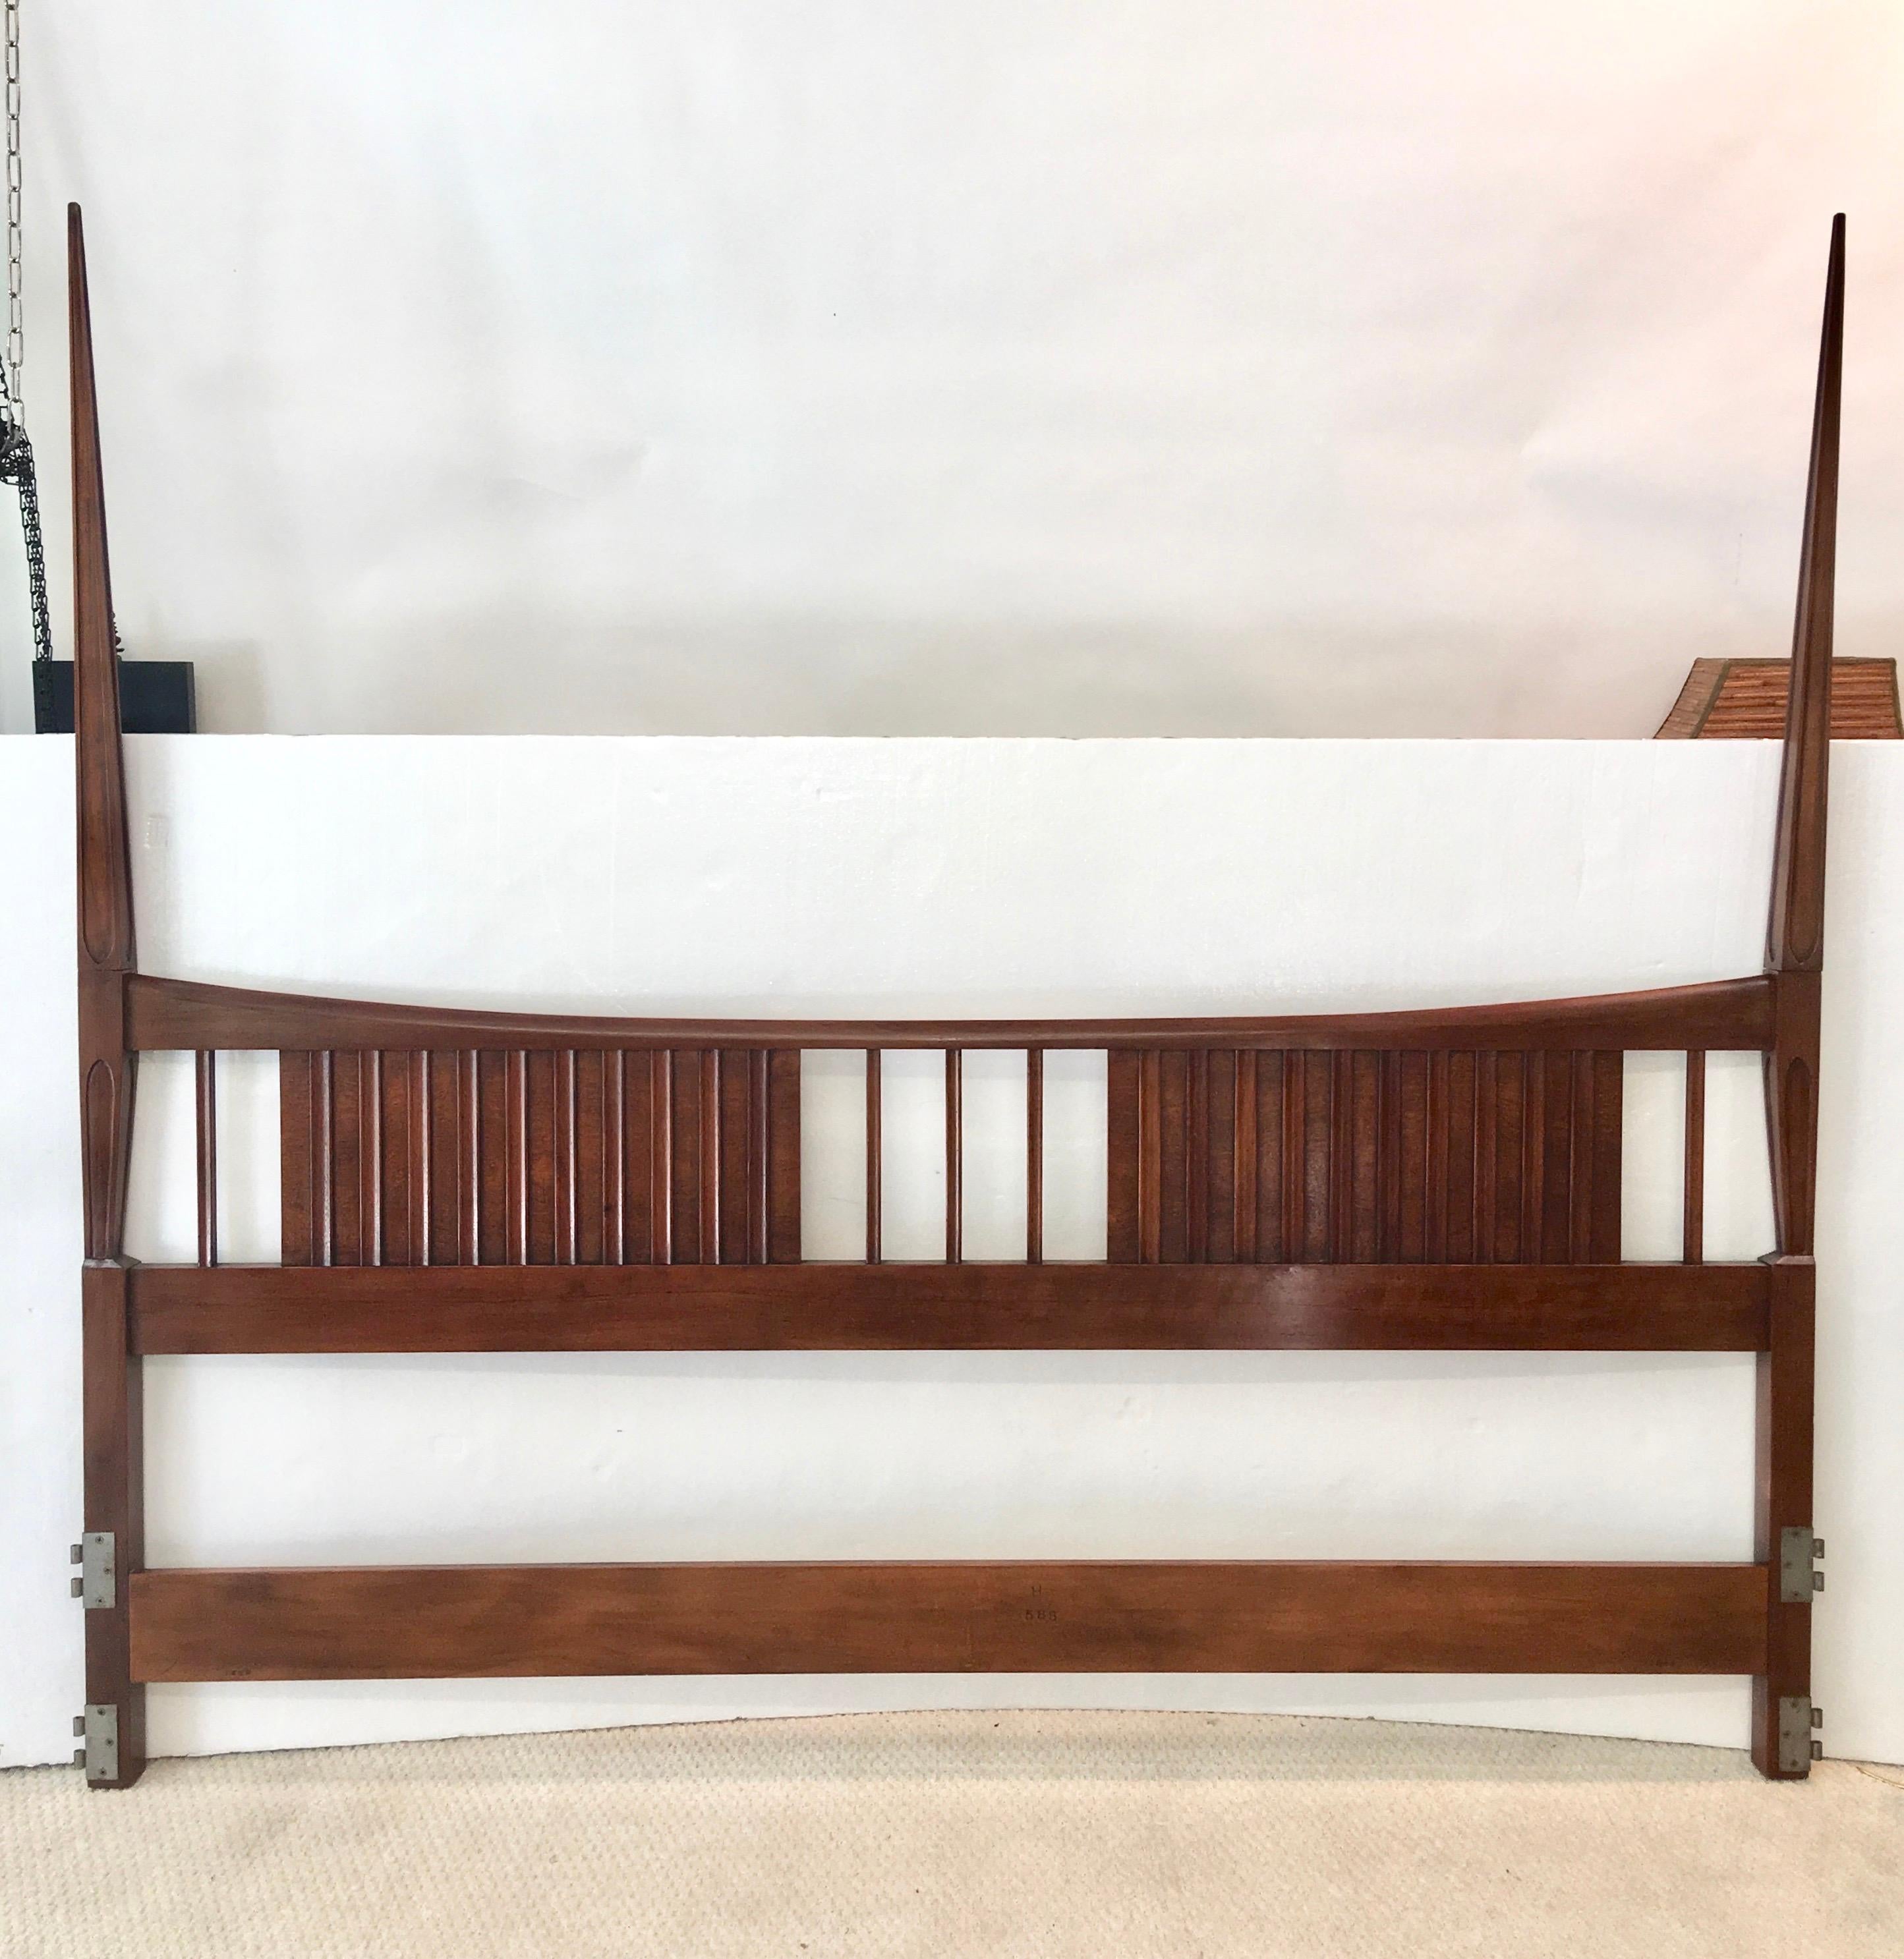 John Widdicomb Mid-Century Modern solid walnut sculptural tall post king size bed headboard with tapered double spires, circa 1960.
Also available two-piece bed frame base if desired.
Dimensions including frame 79.5